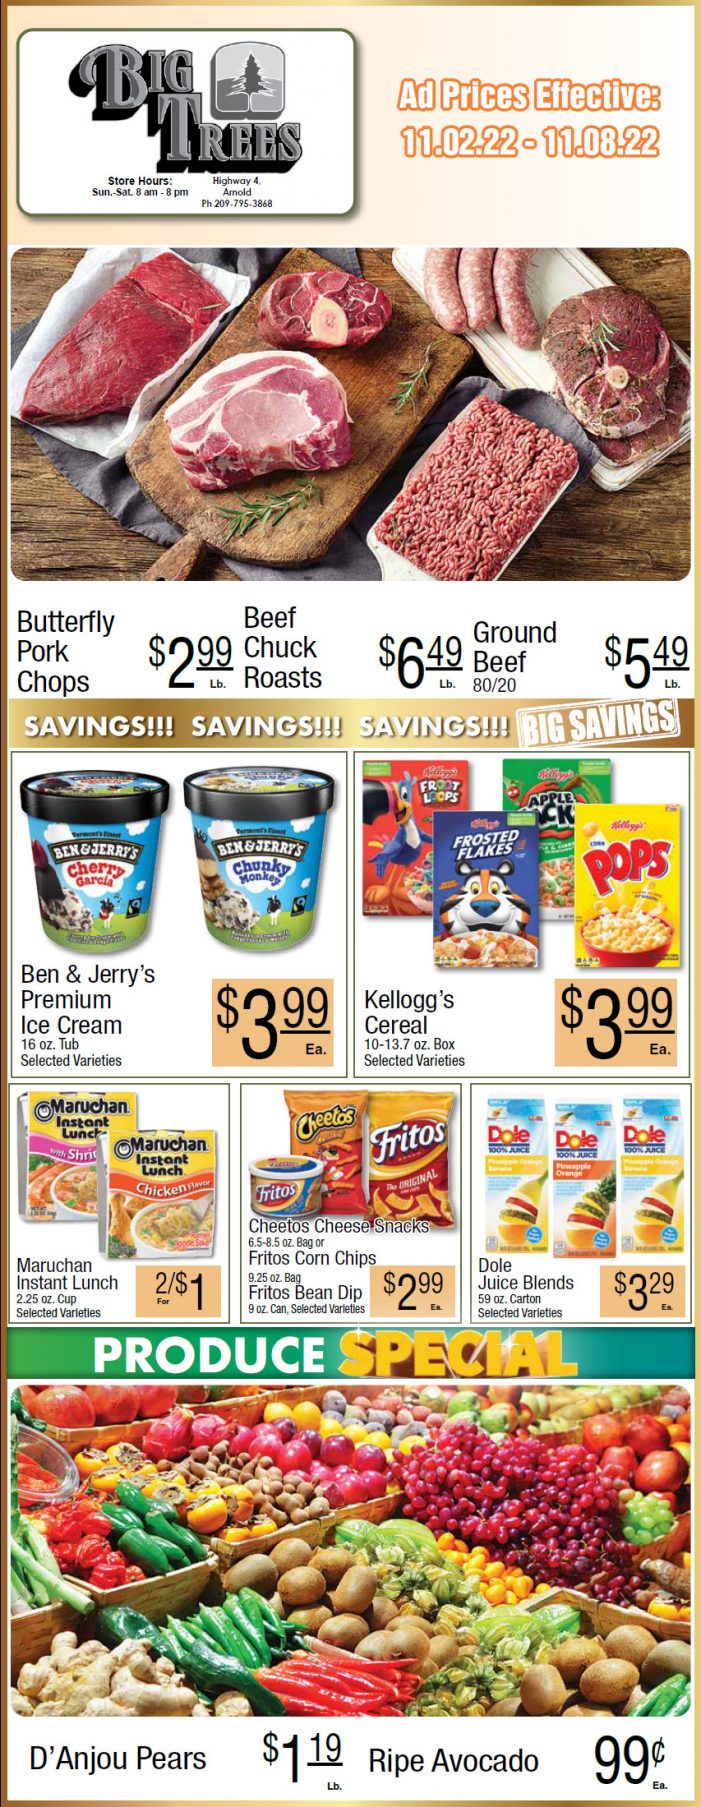 Big Trees Market Weekly Ad & Grocery Specials November 2 – 8!  Shop Local & Save!!